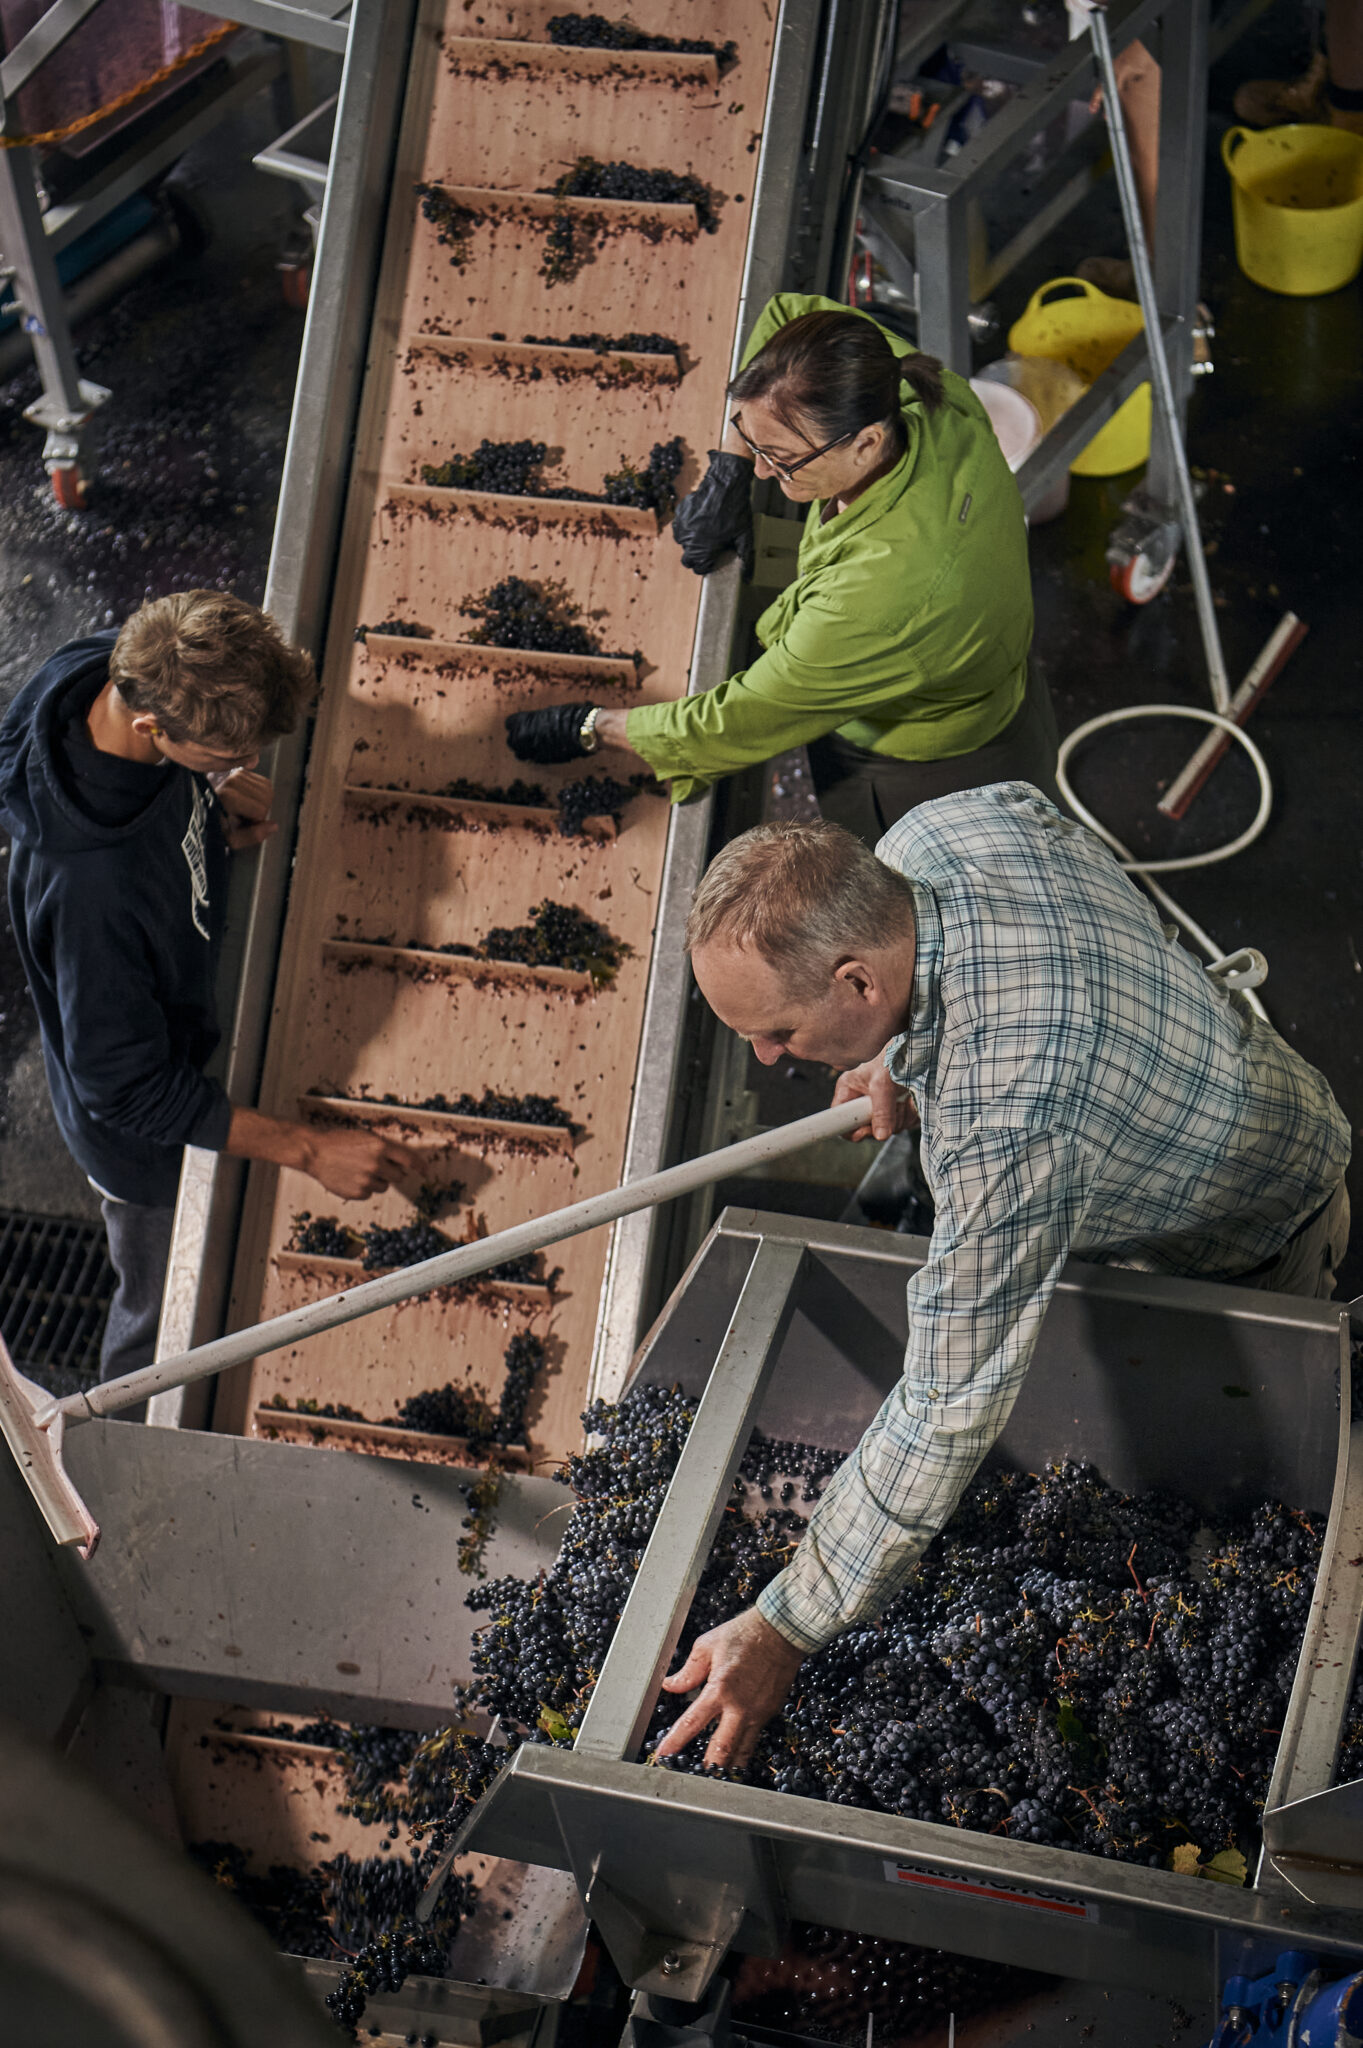 Moss Wood workers inspecting grapes